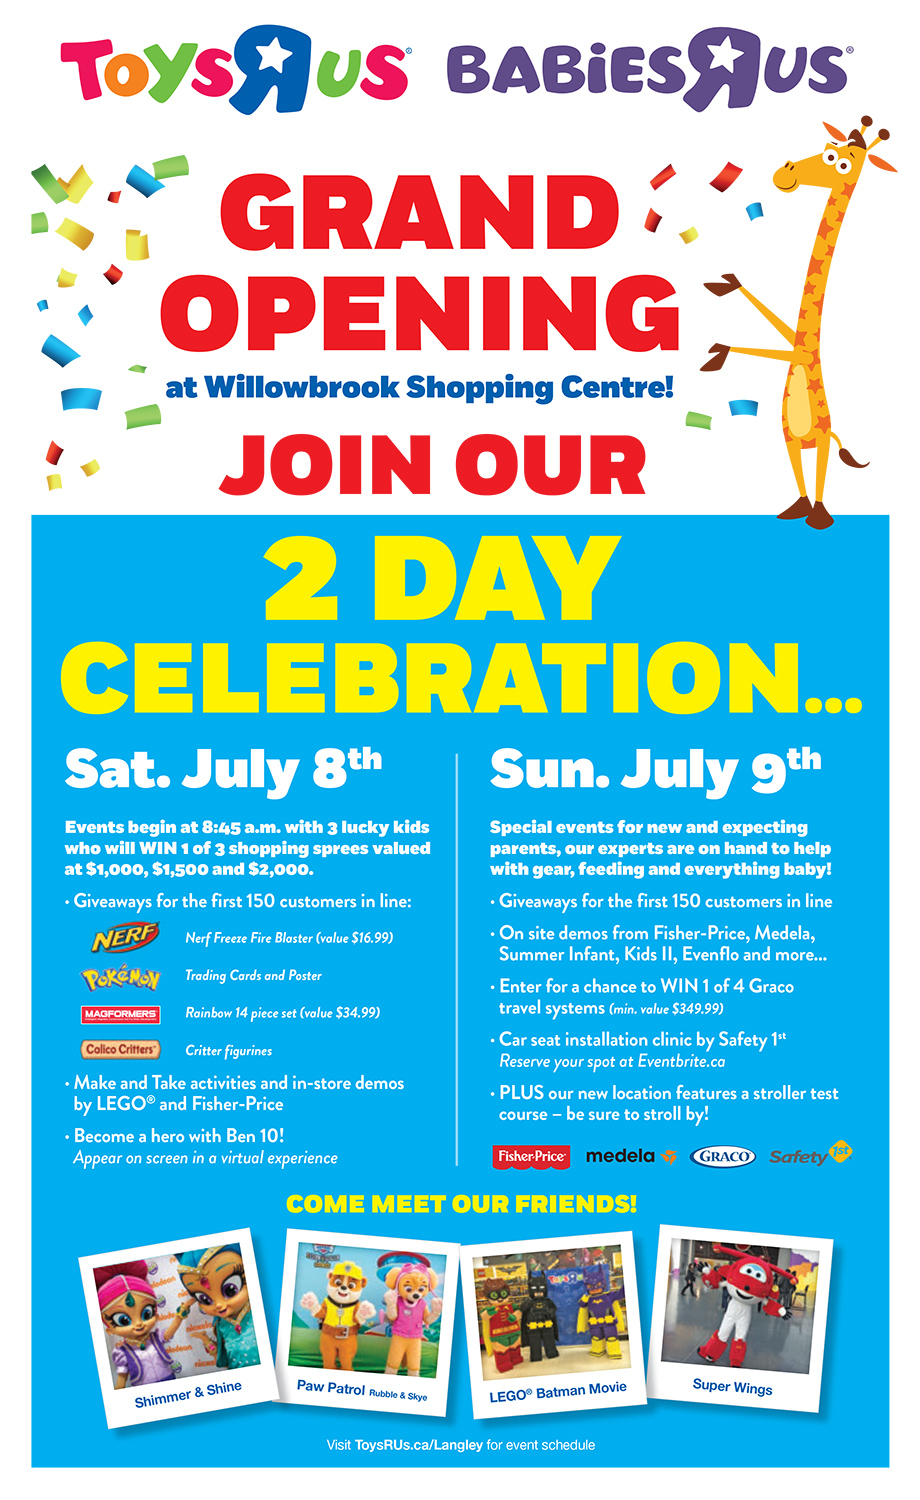 It’s Time to Celebrate! Toys“R”Us and Babies“R”Us Langley Host Grand Opening July 8 and 9 - image